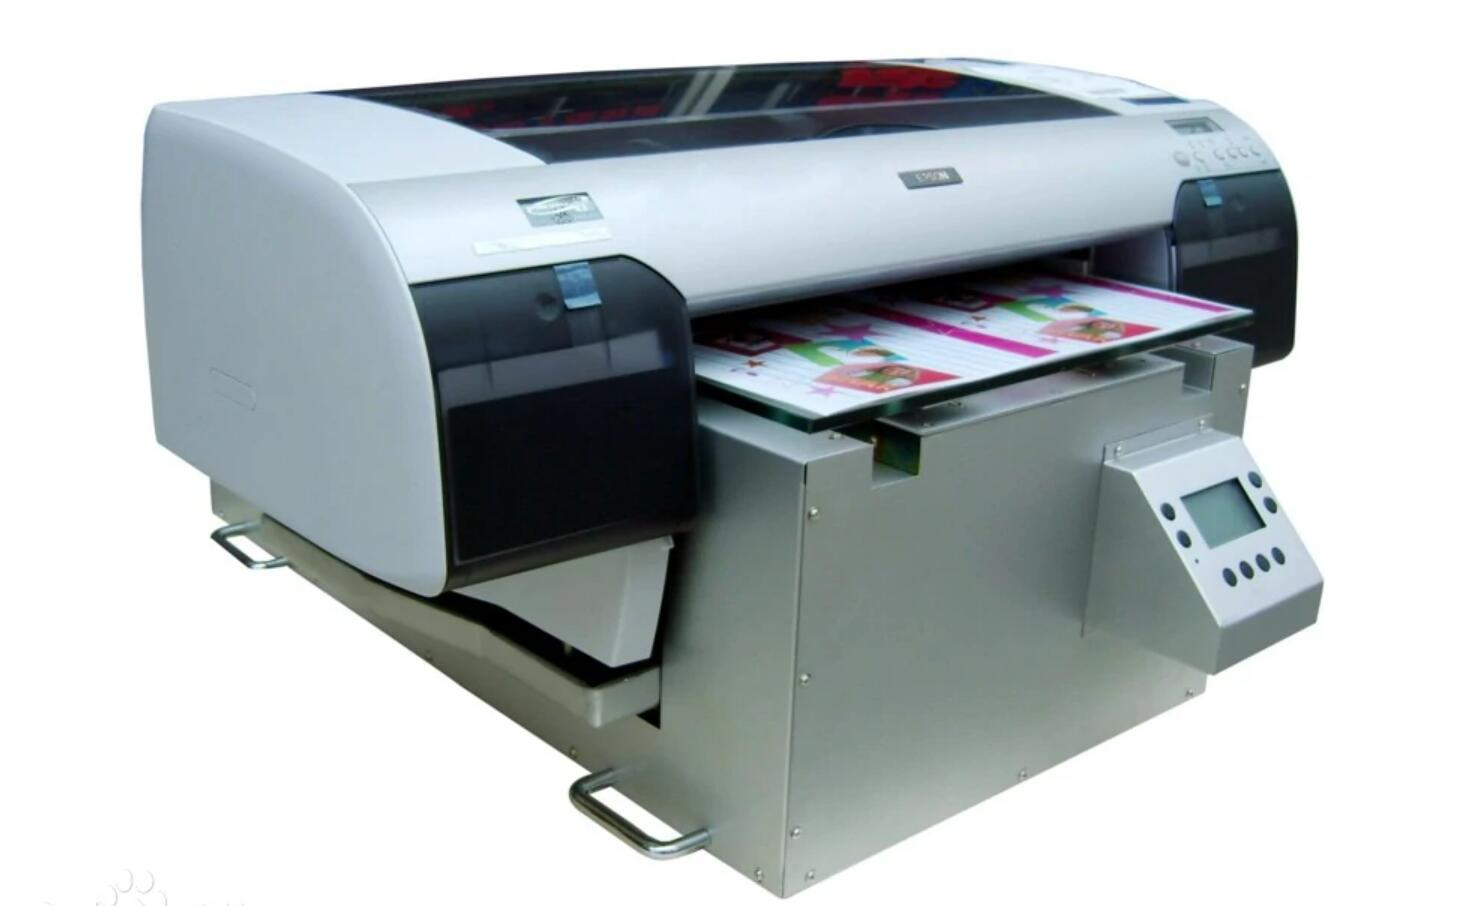 What are the features and scope of use of large format printers?